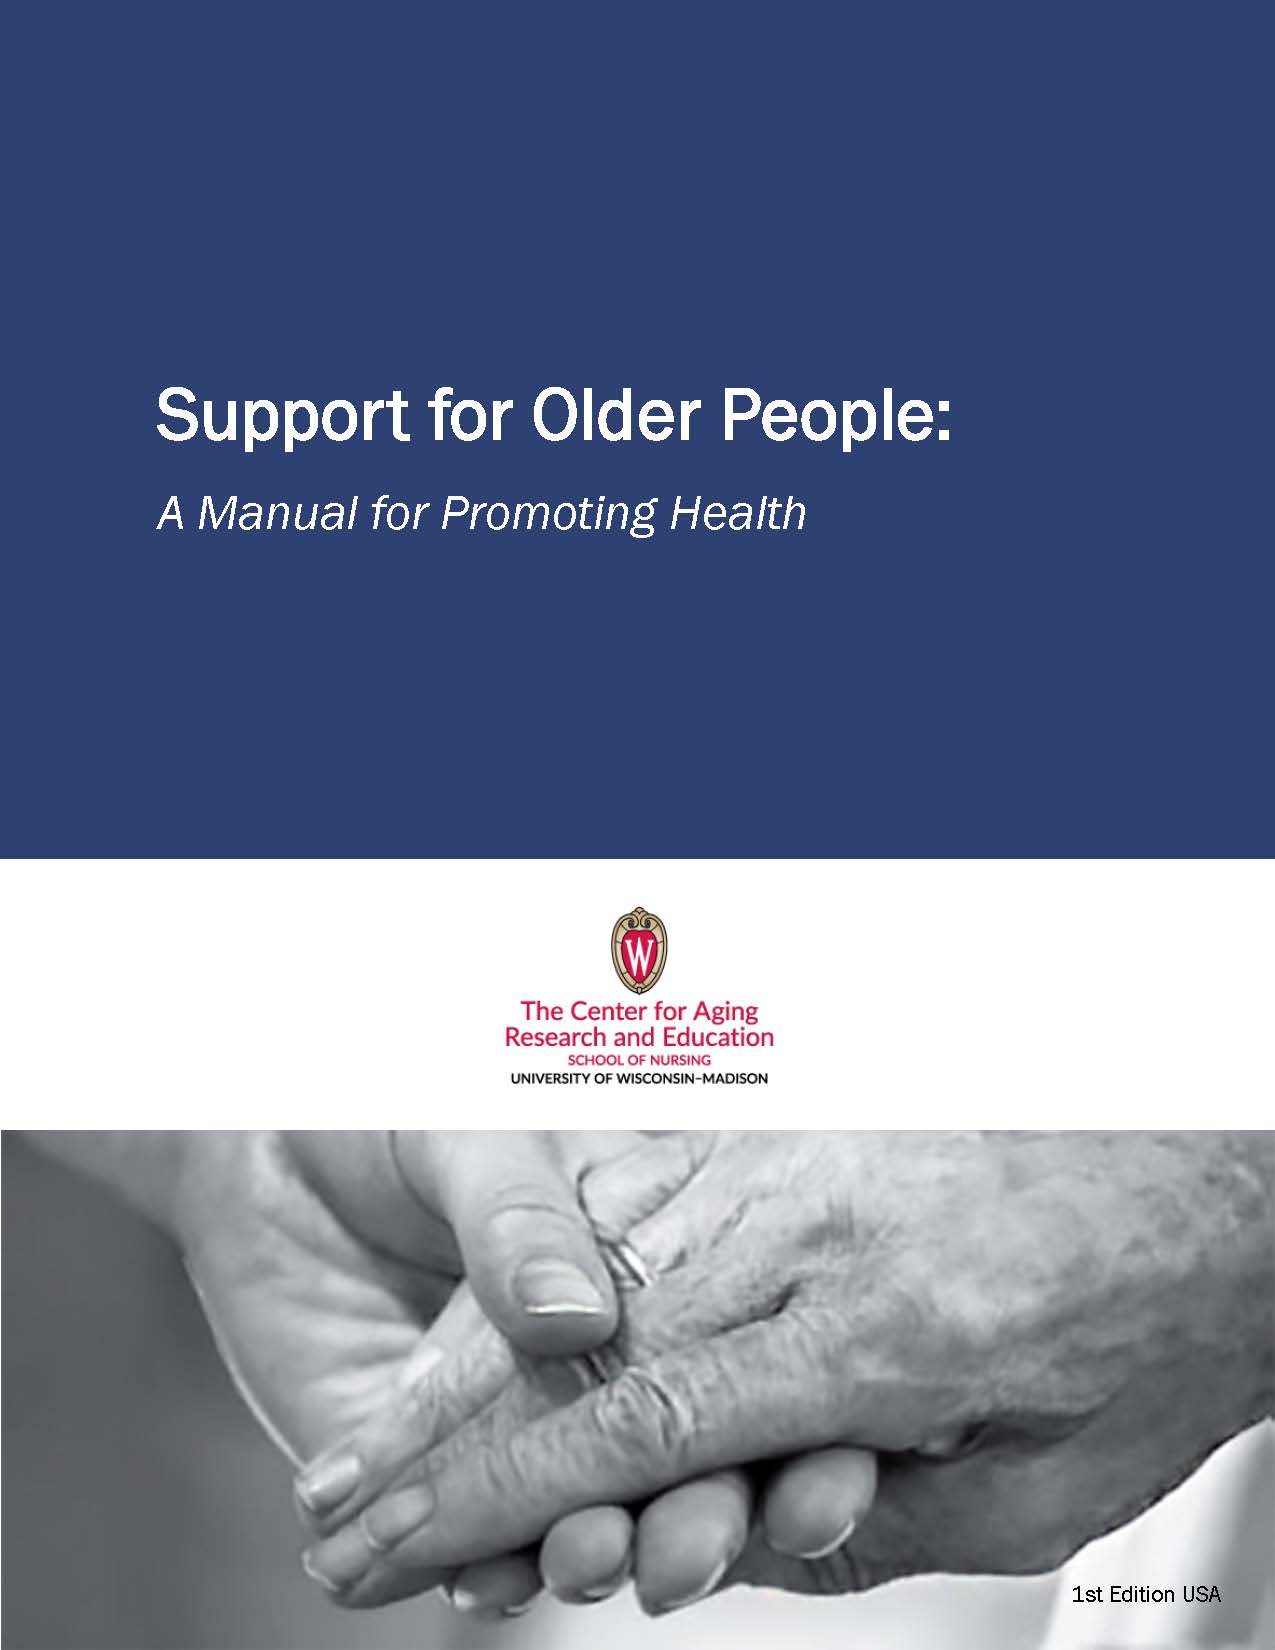 Support for Older People - US 